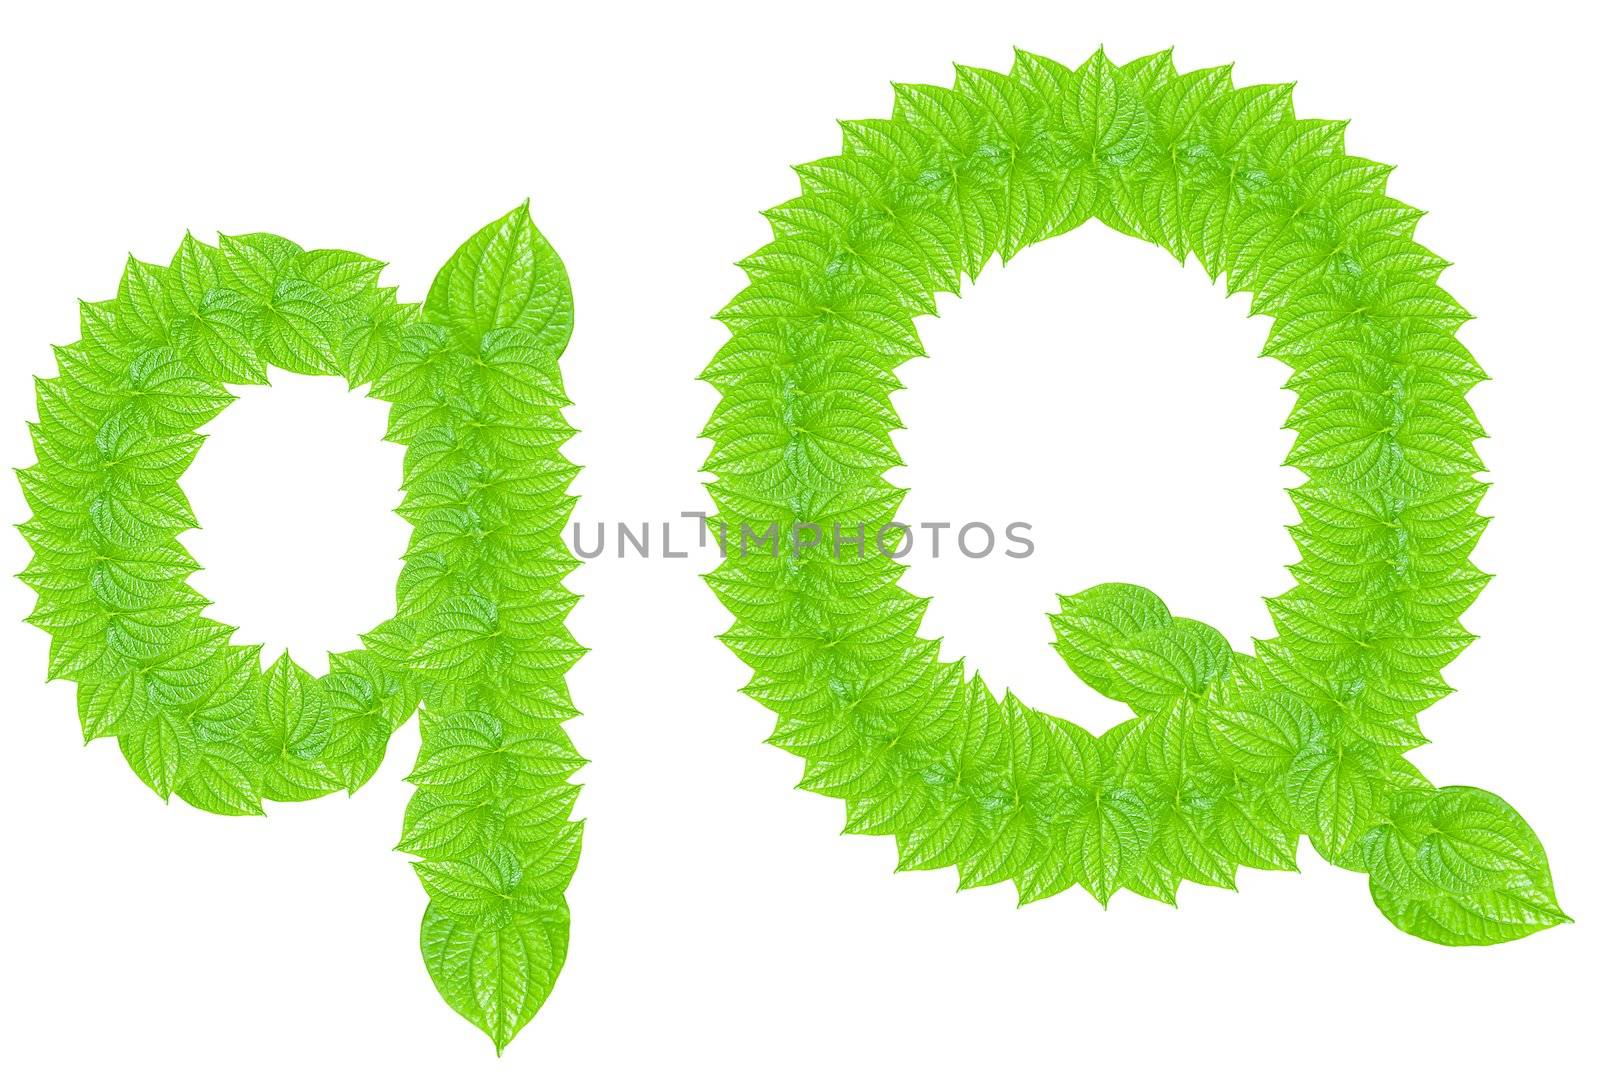 English alphabet made from green leafs with letter Q in small capital and large capital letter